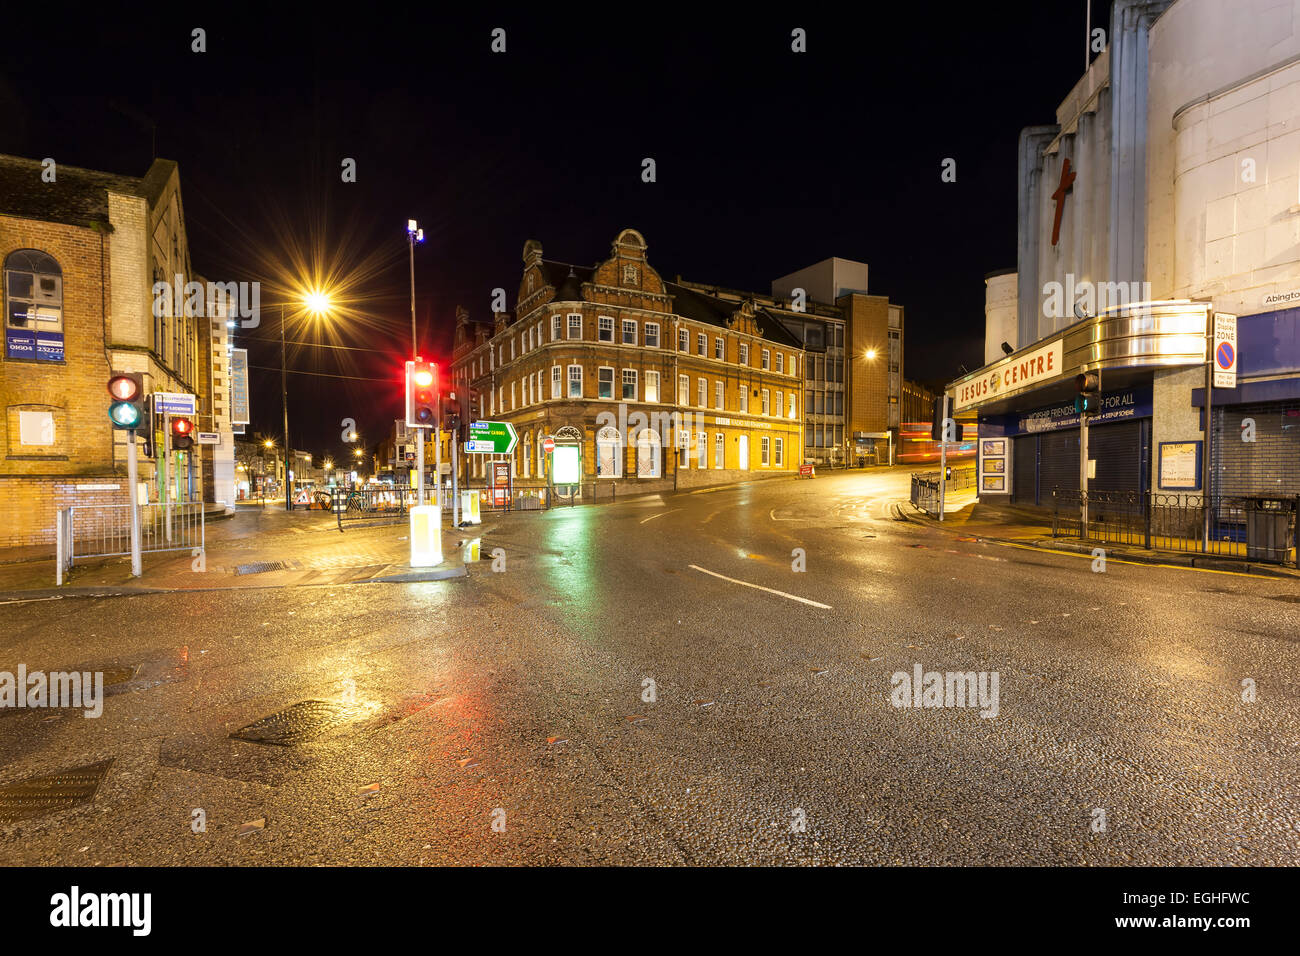 Radio Northampton Broadcasting House early hours of the morning Stock Photo